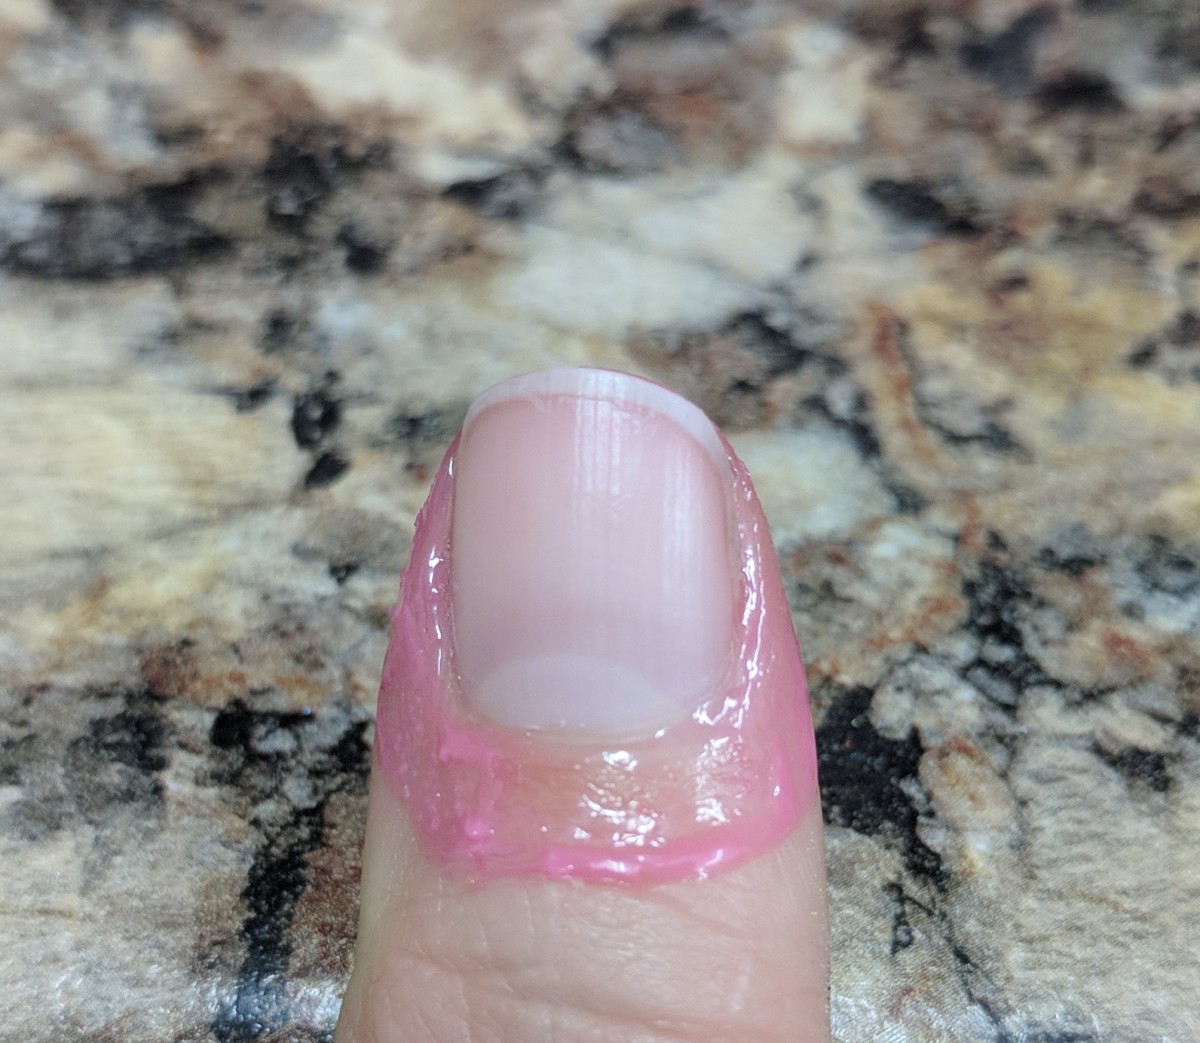 What it looks like after you apply the latex. make sure you apply on your finger tip above the nail too.